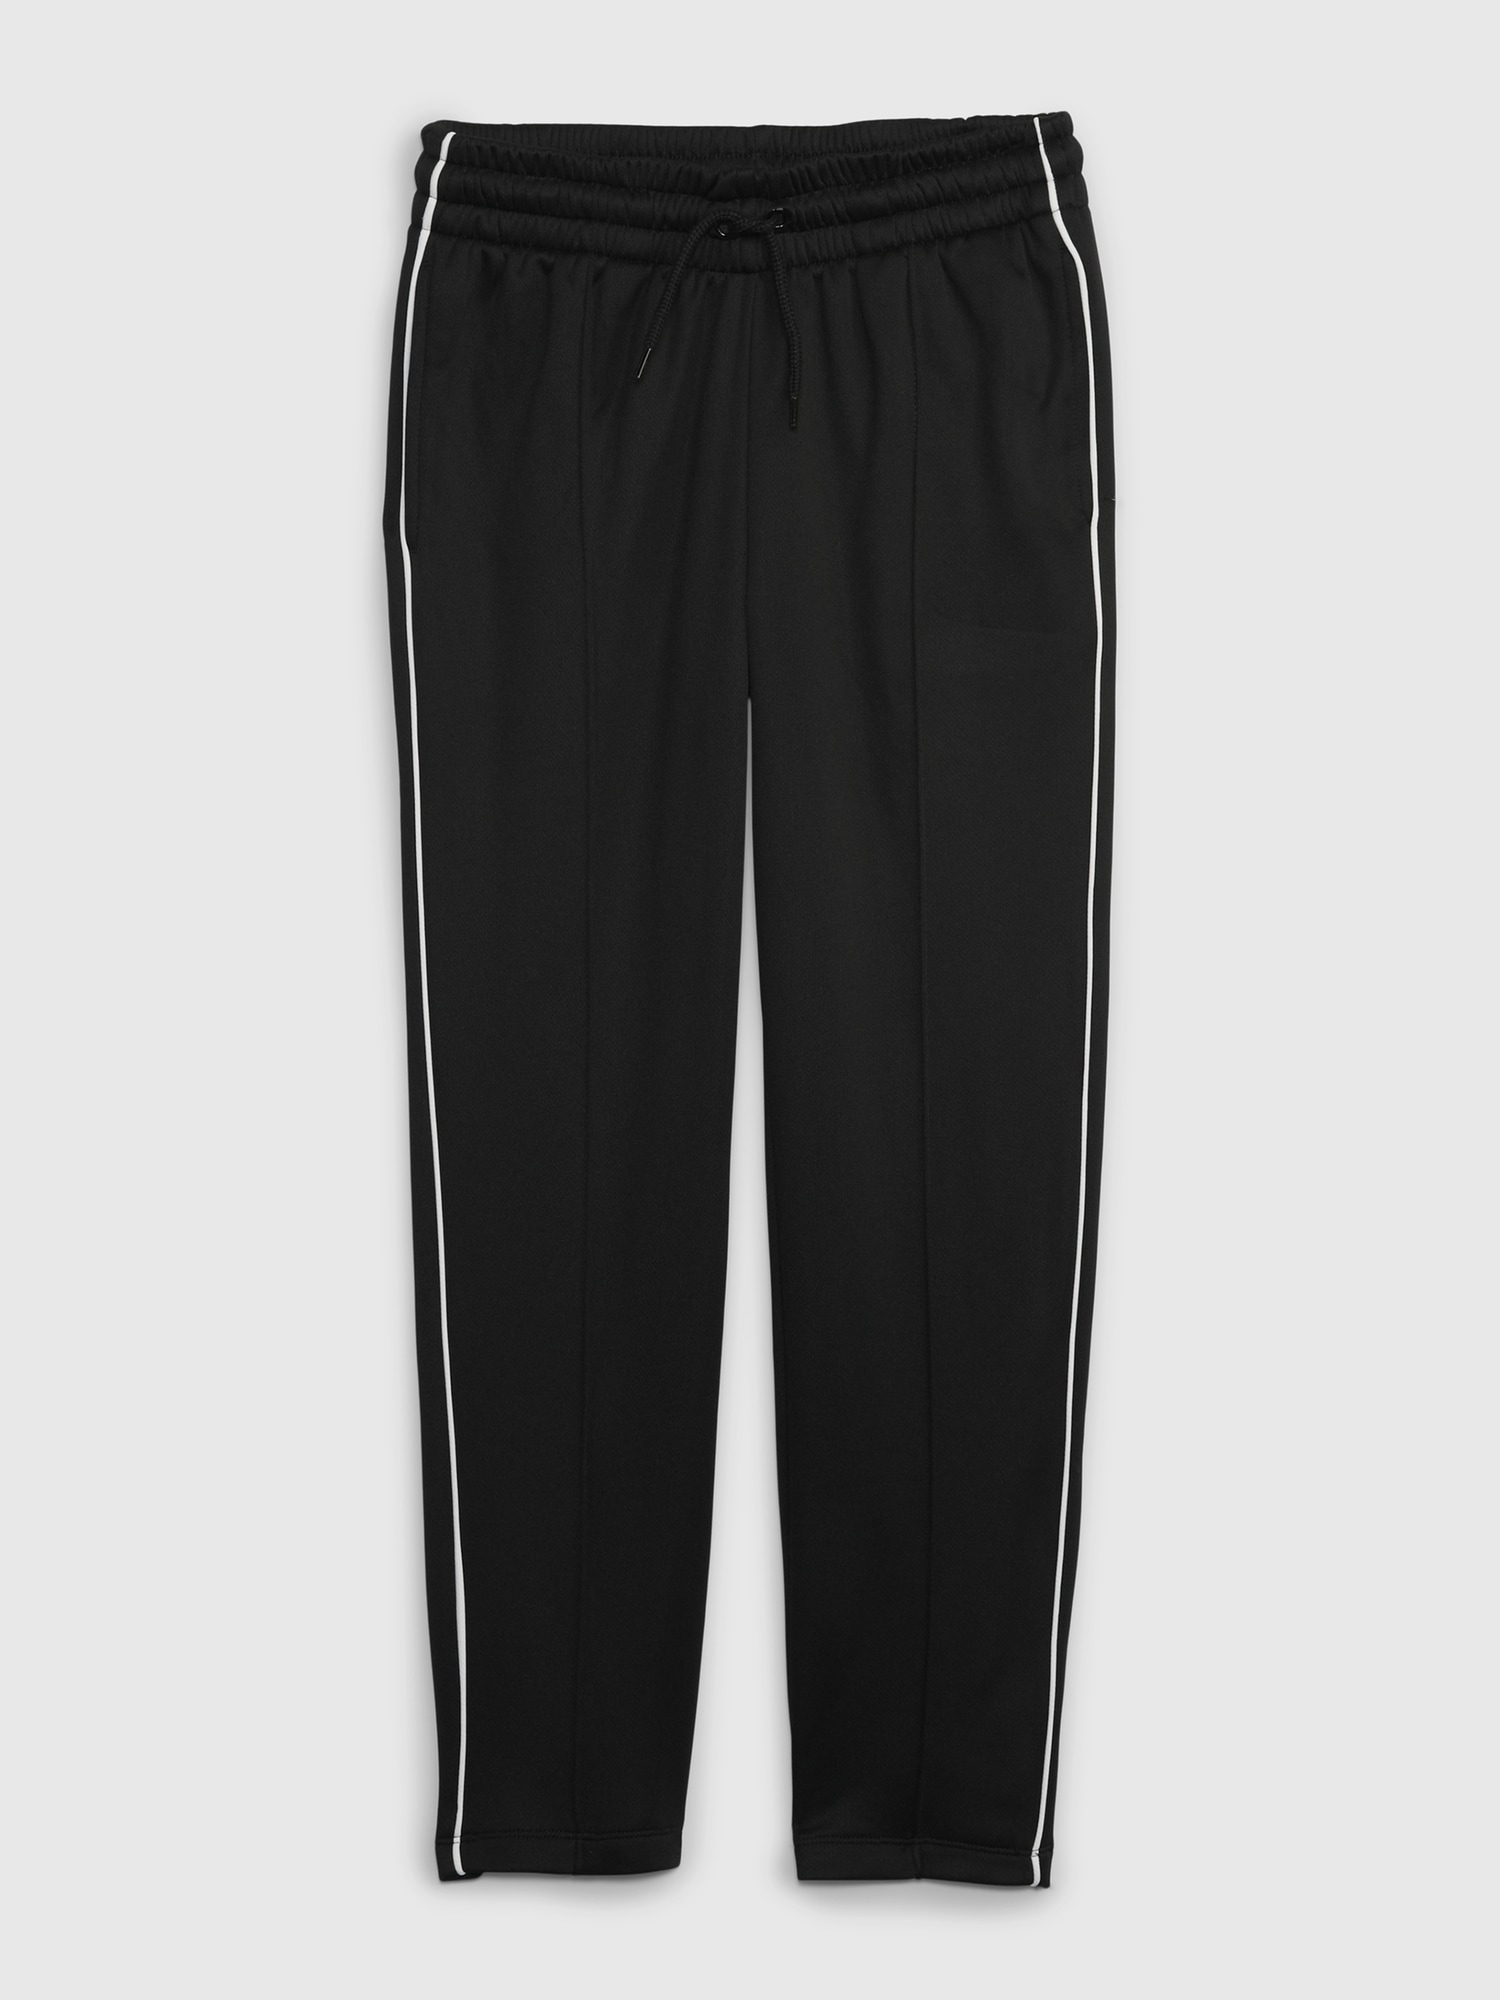 Summer Cargo Sweatpants For Men Loose Fit Running Leggings With Pockets For  Boys, Perfect For Fitness And Streetwear From Huyitian, $26.89 | DHgate.Com